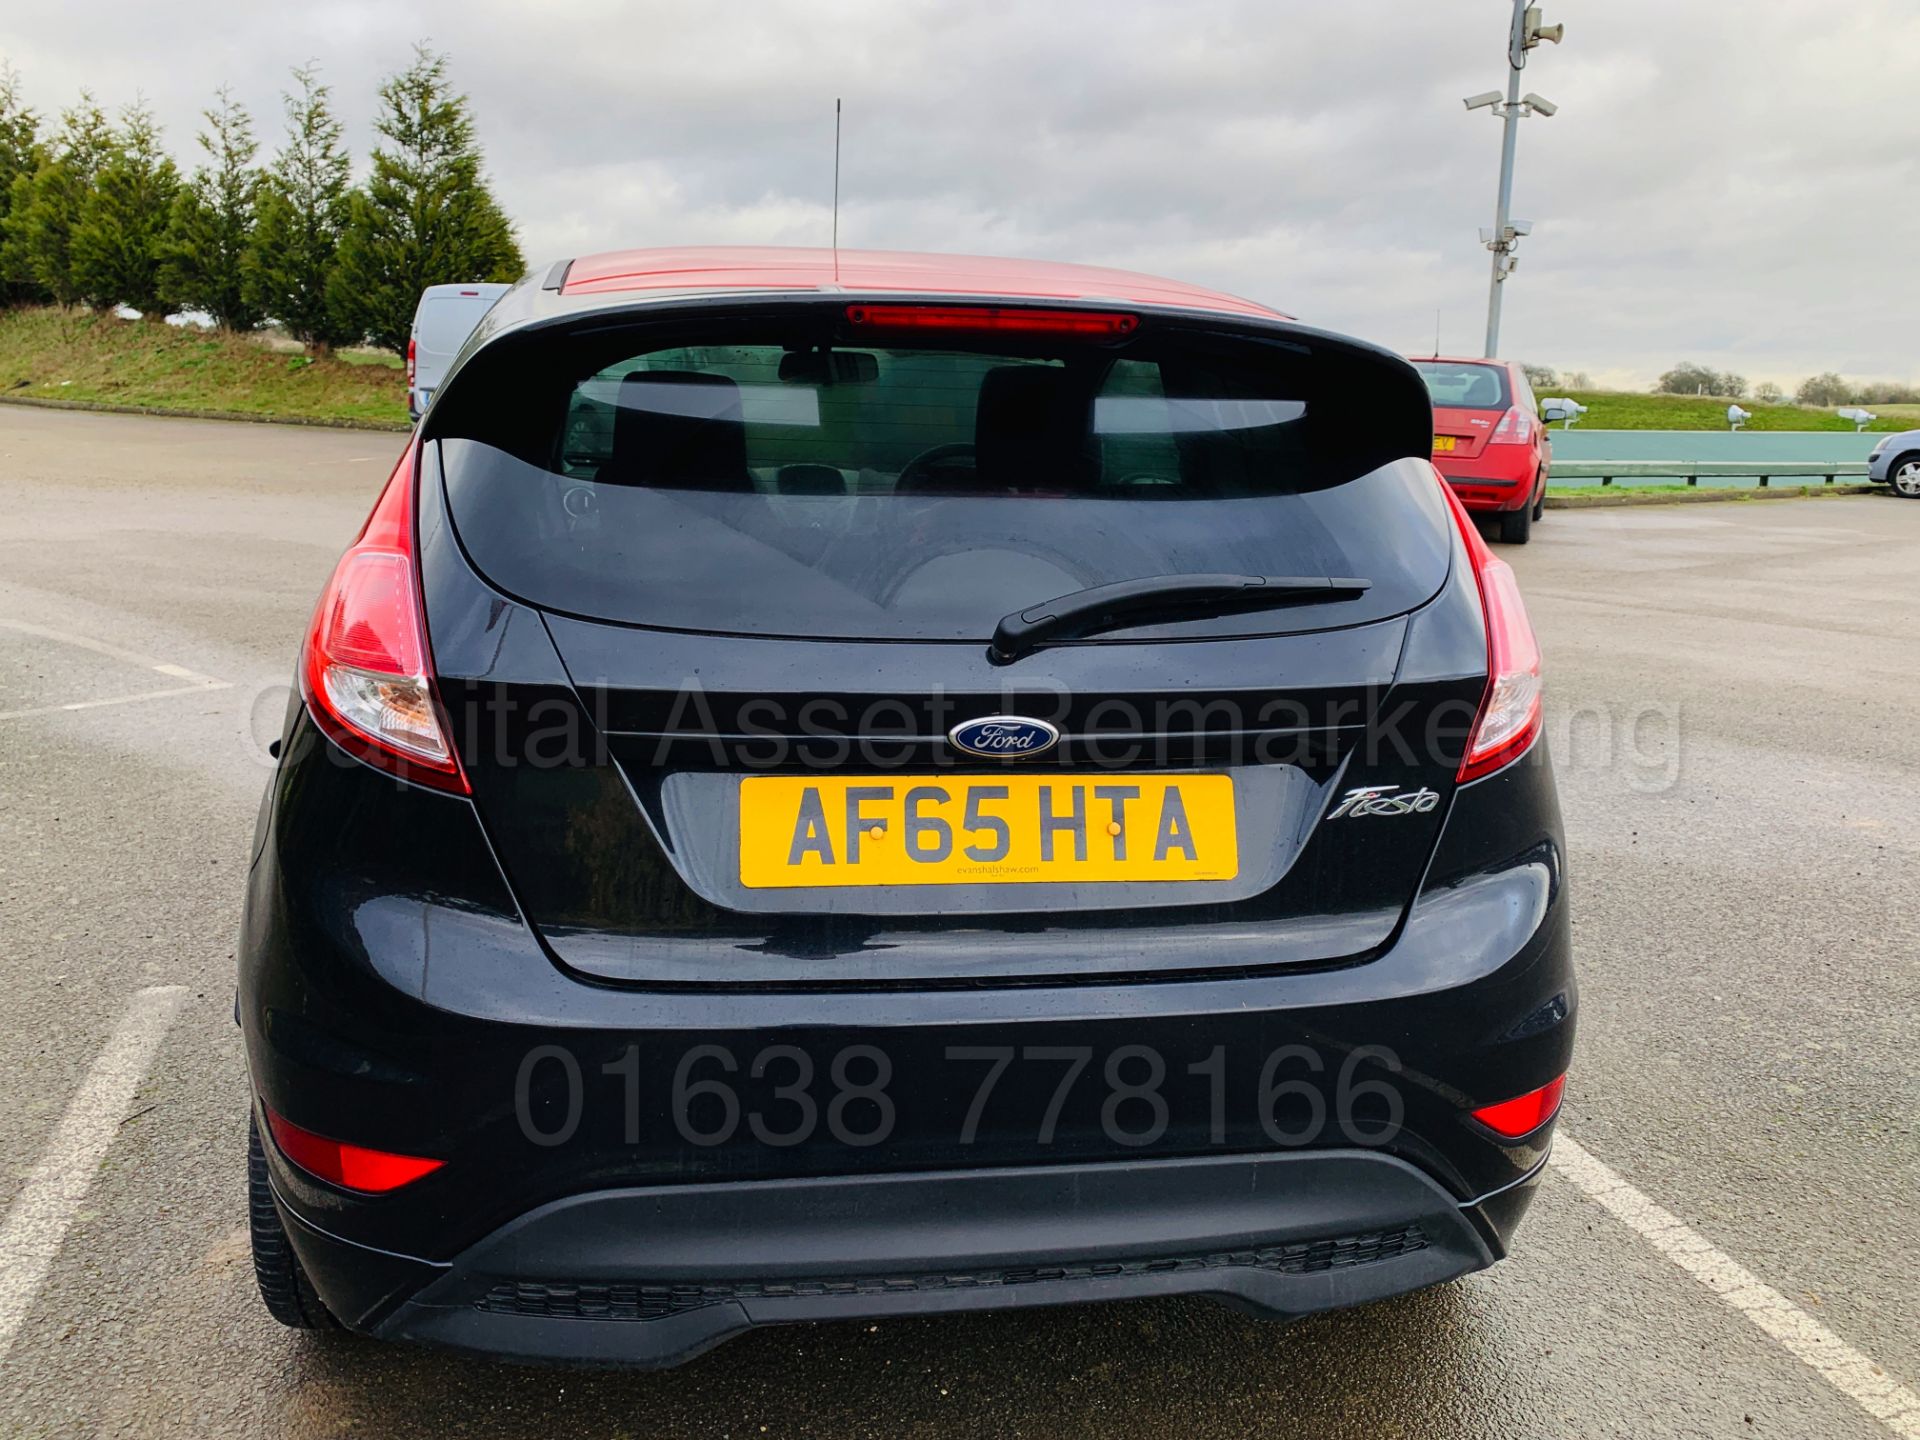 (On Sale) FORD FIESTA *ZETEC S - BLACK EDITION* (2016 MODEL) '1.0L ECO-BOOST - 140 BHP' - Image 9 of 45